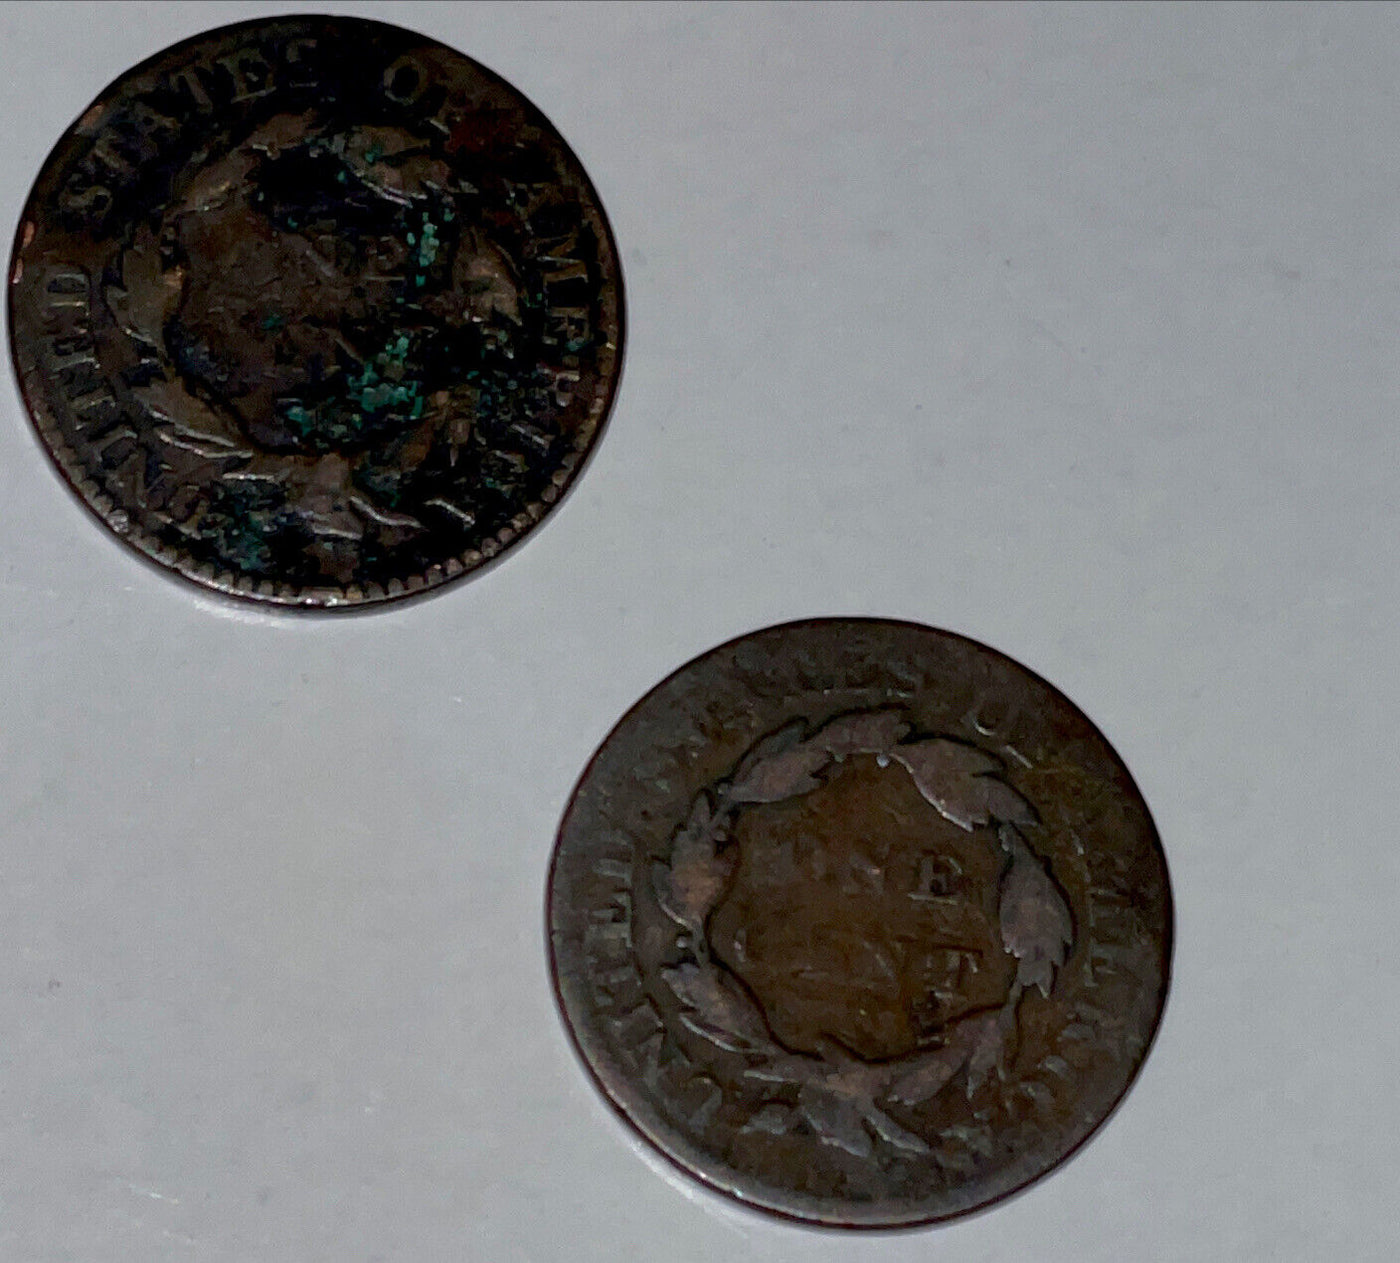 pair of very good large cents 1819 Sm Dates and scarce1820/19 - 200 years young!